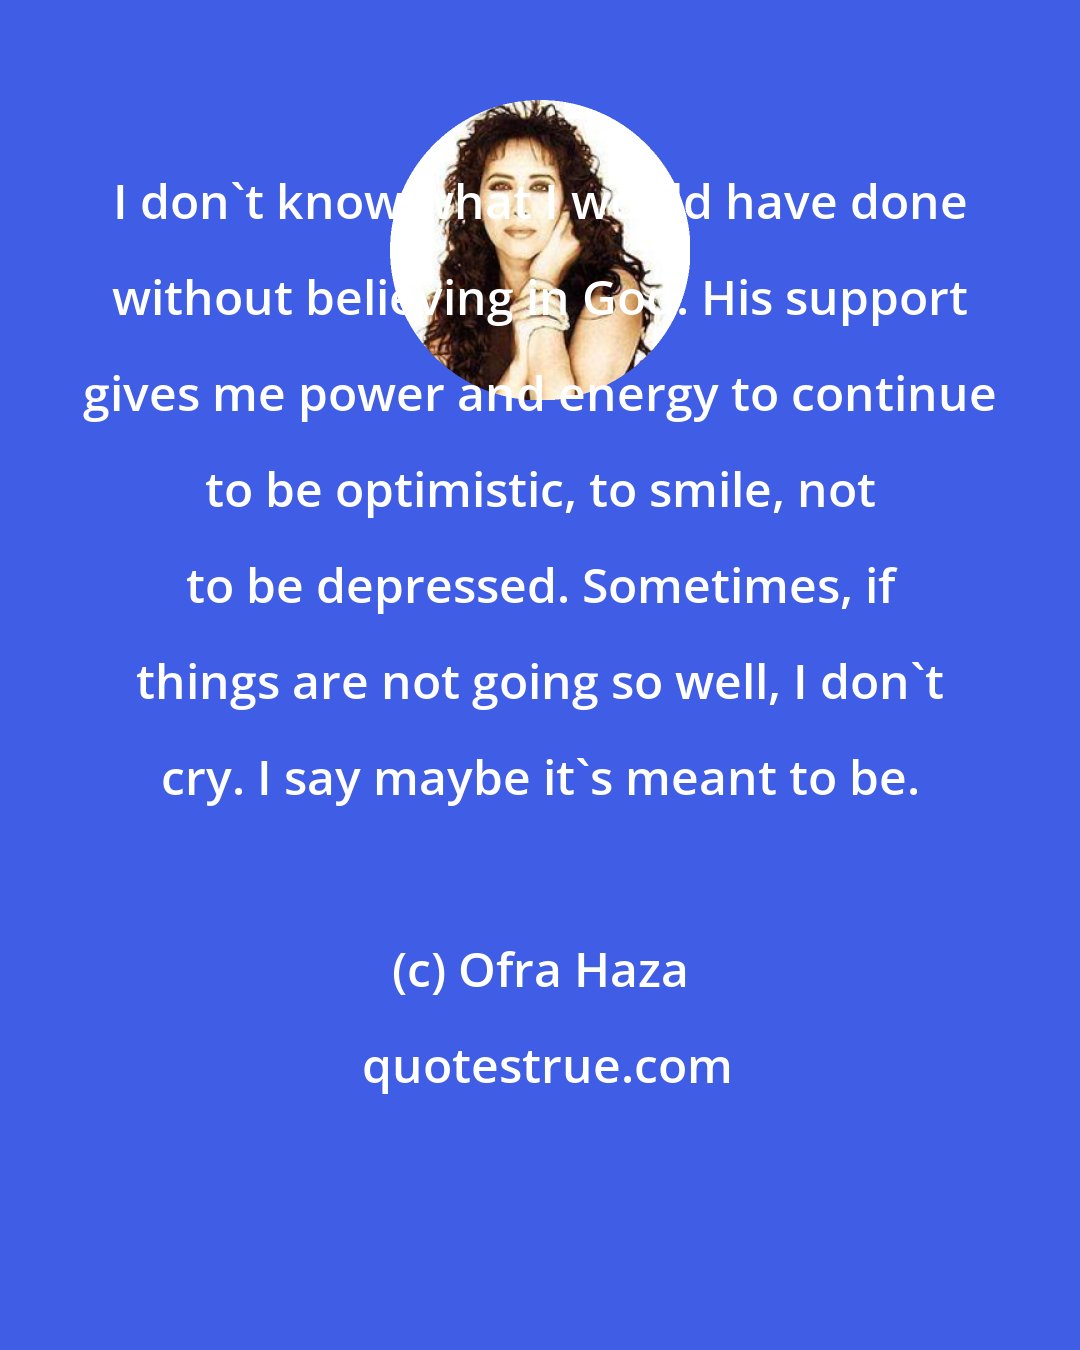 Ofra Haza: I don't know what I would have done without believing in God. His support gives me power and energy to continue to be optimistic, to smile, not to be depressed. Sometimes, if things are not going so well, I don't cry. I say maybe it's meant to be.